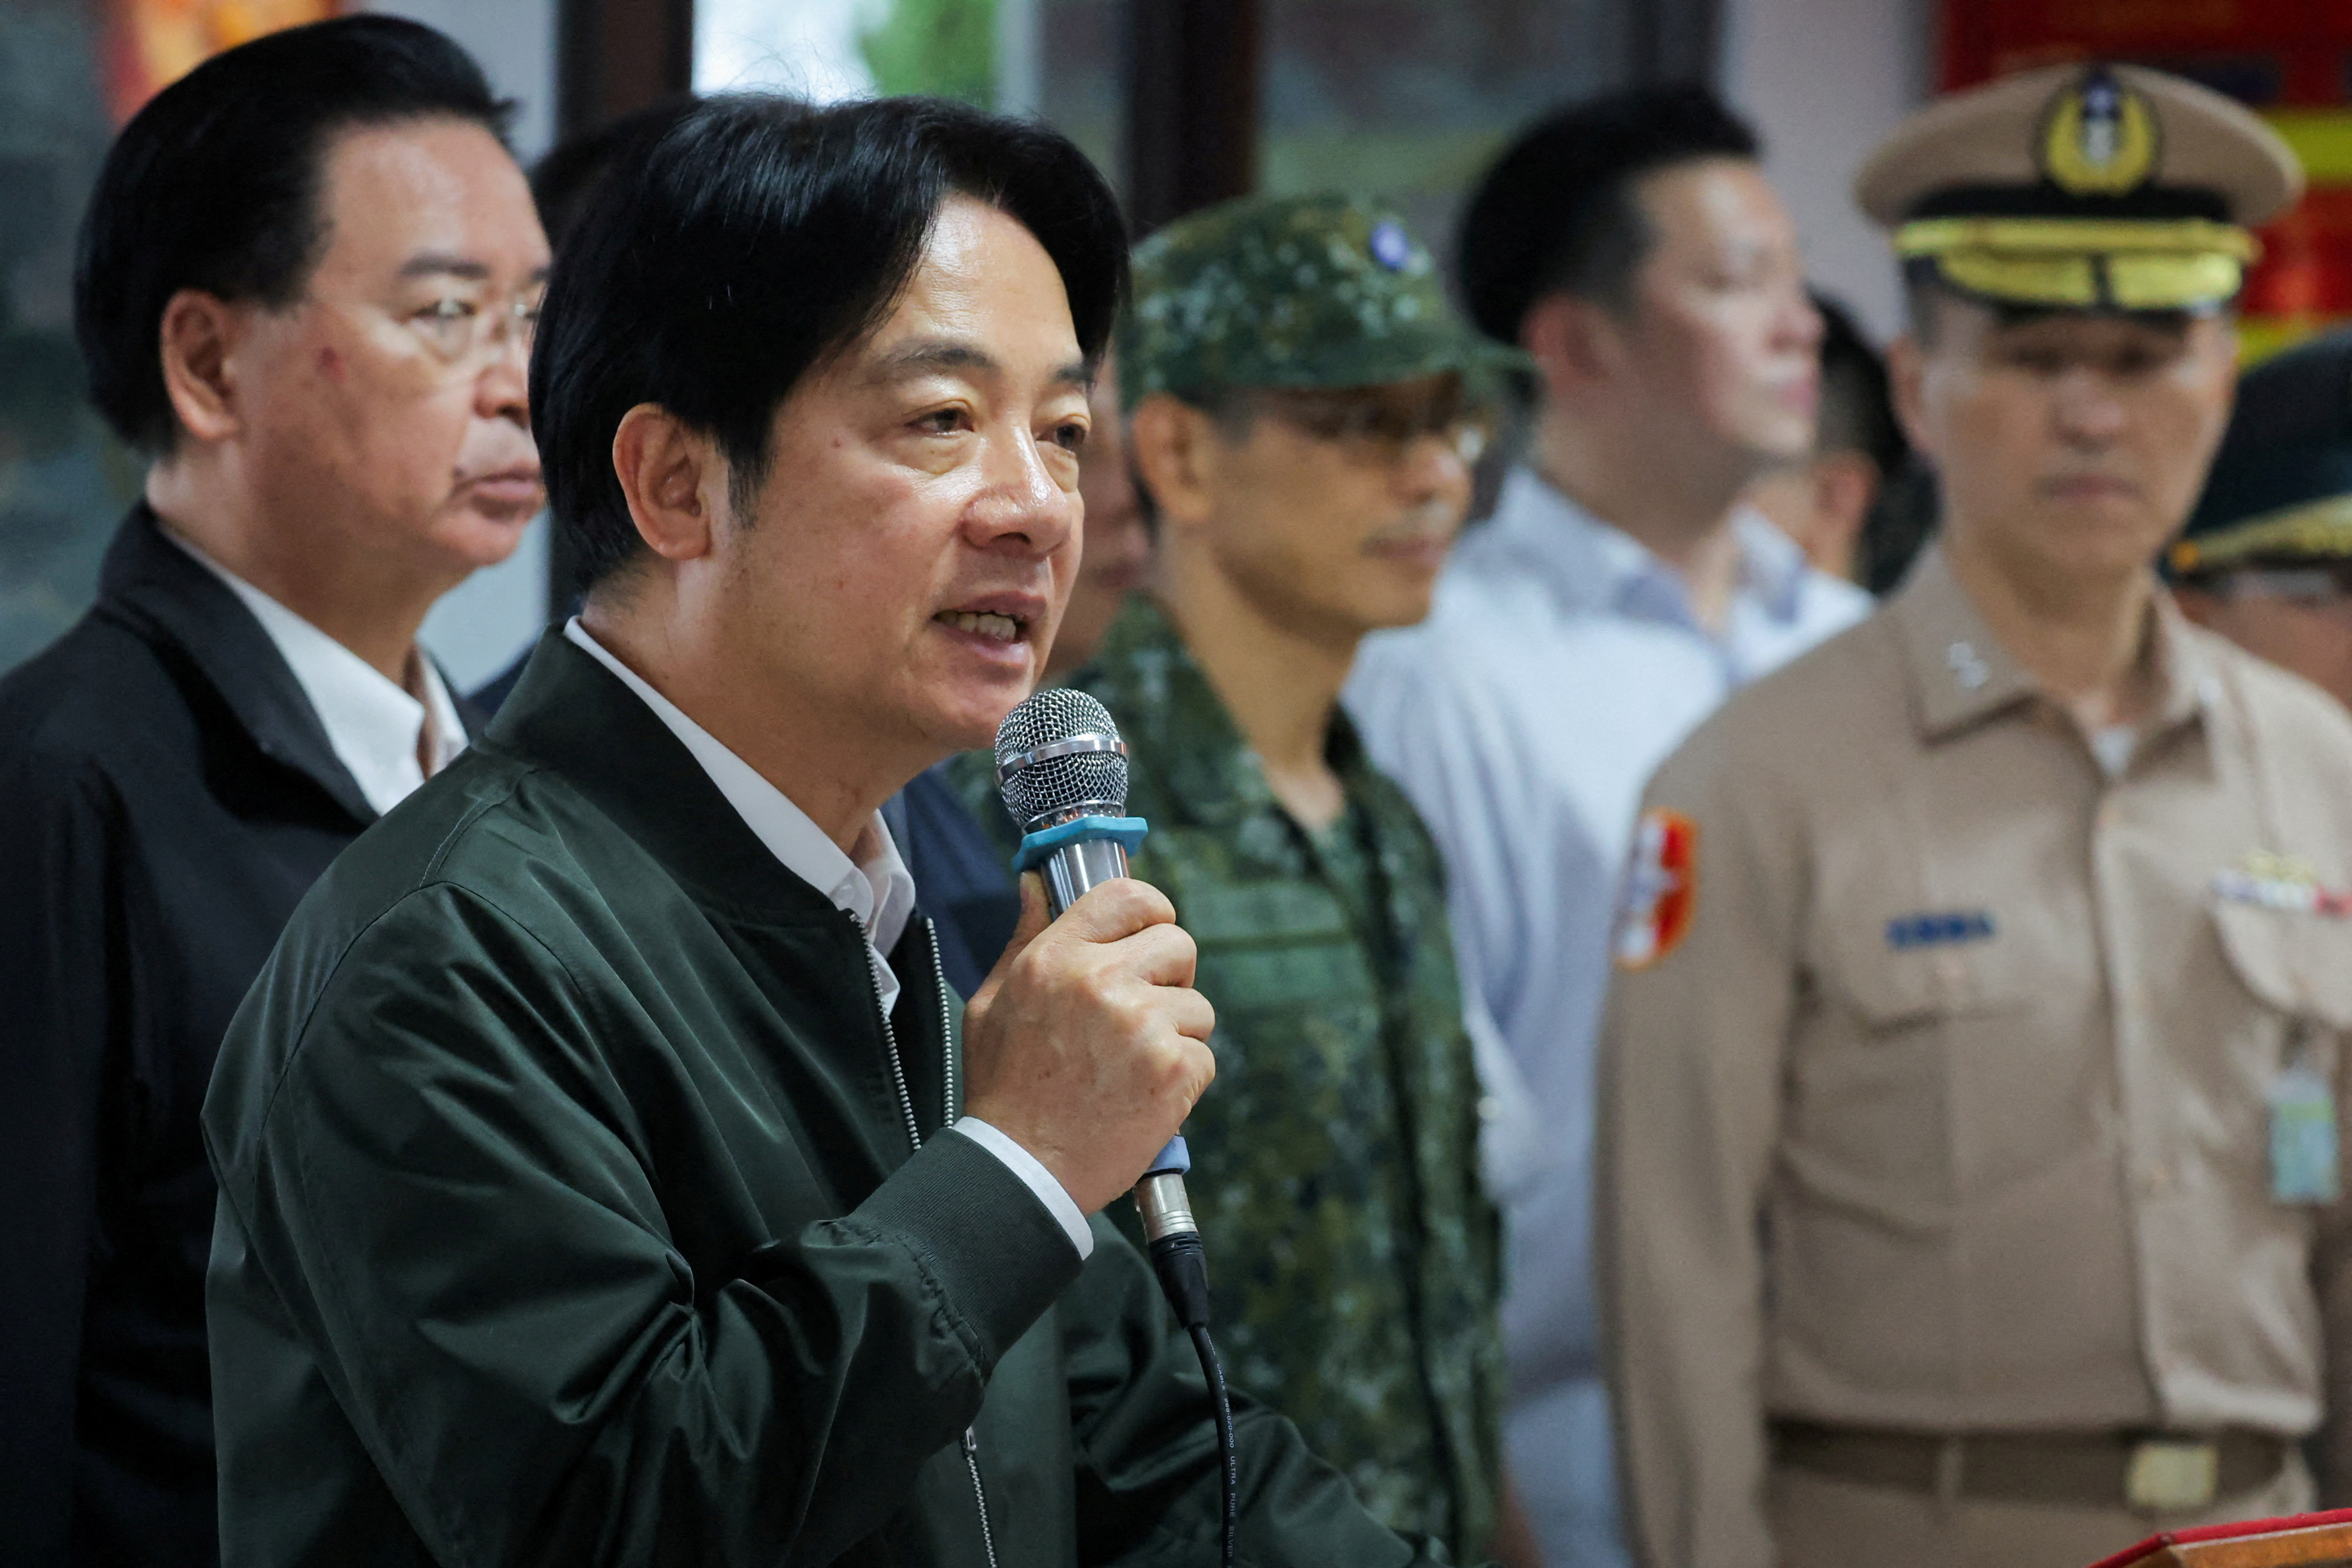 Taiwan President Lai Ching-te makes a speech during his visit to a military camp in Taoyuan